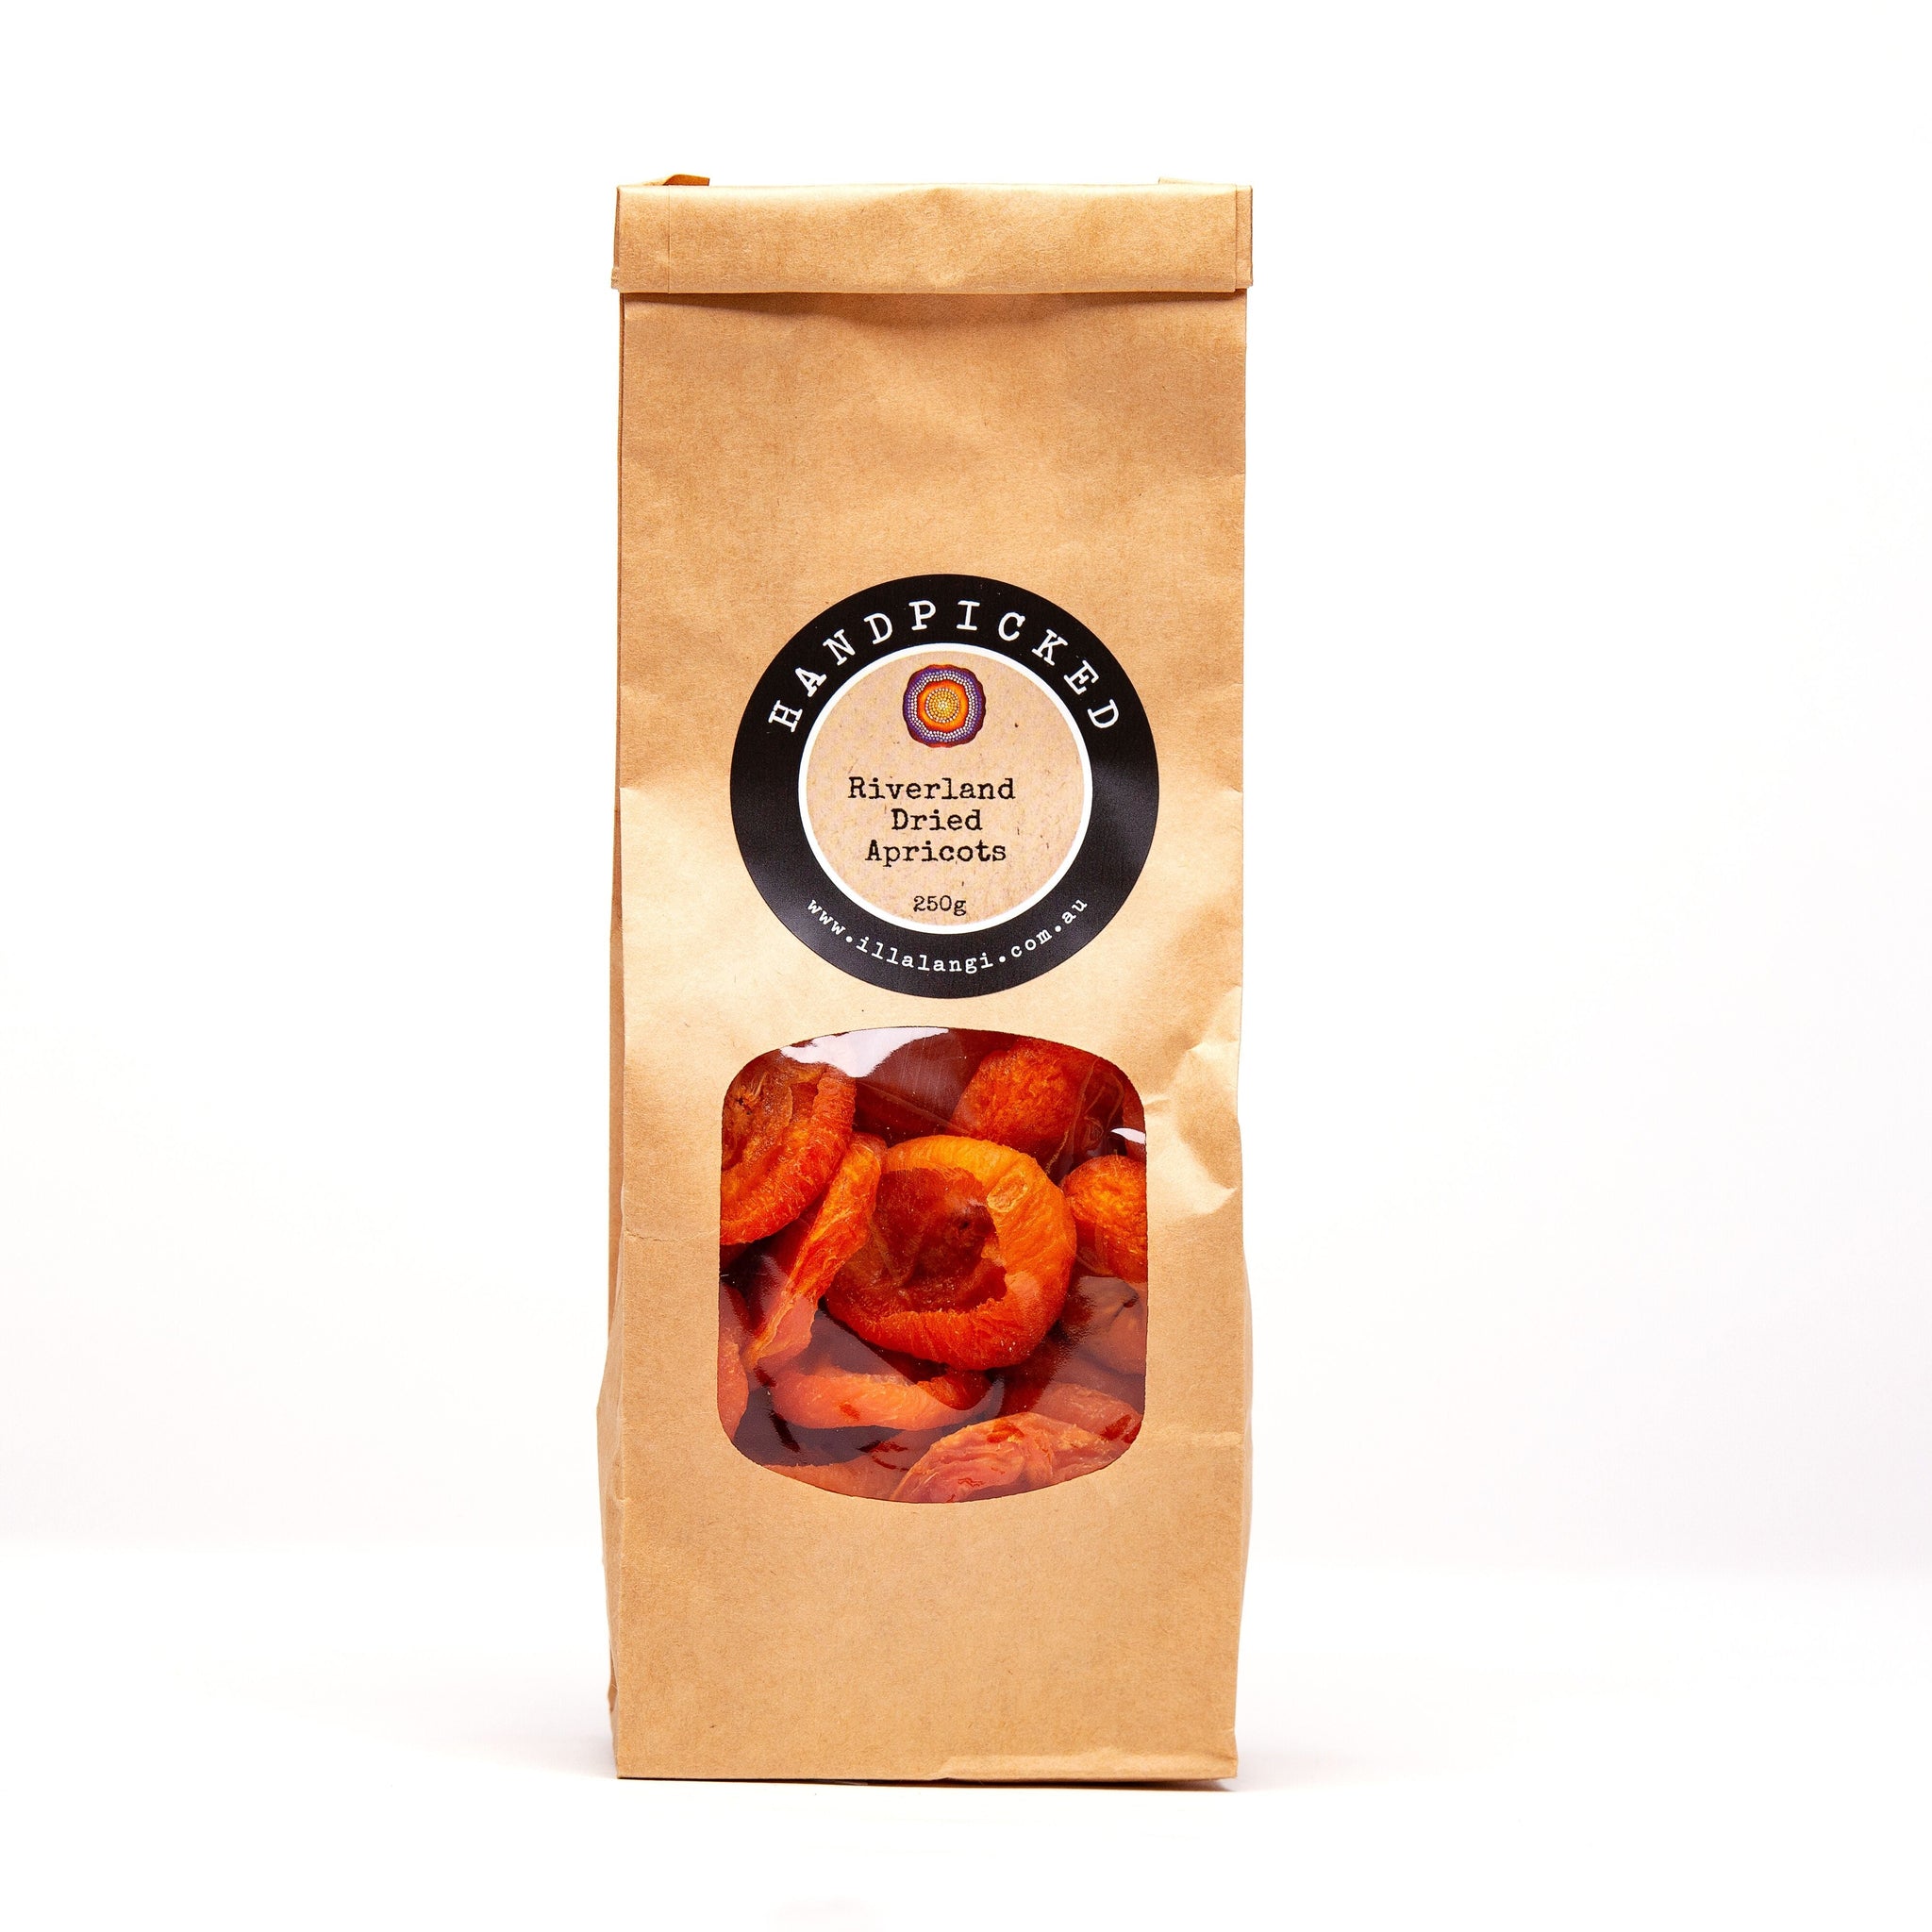 Handpicked Riverland Dried Apricots - 250g